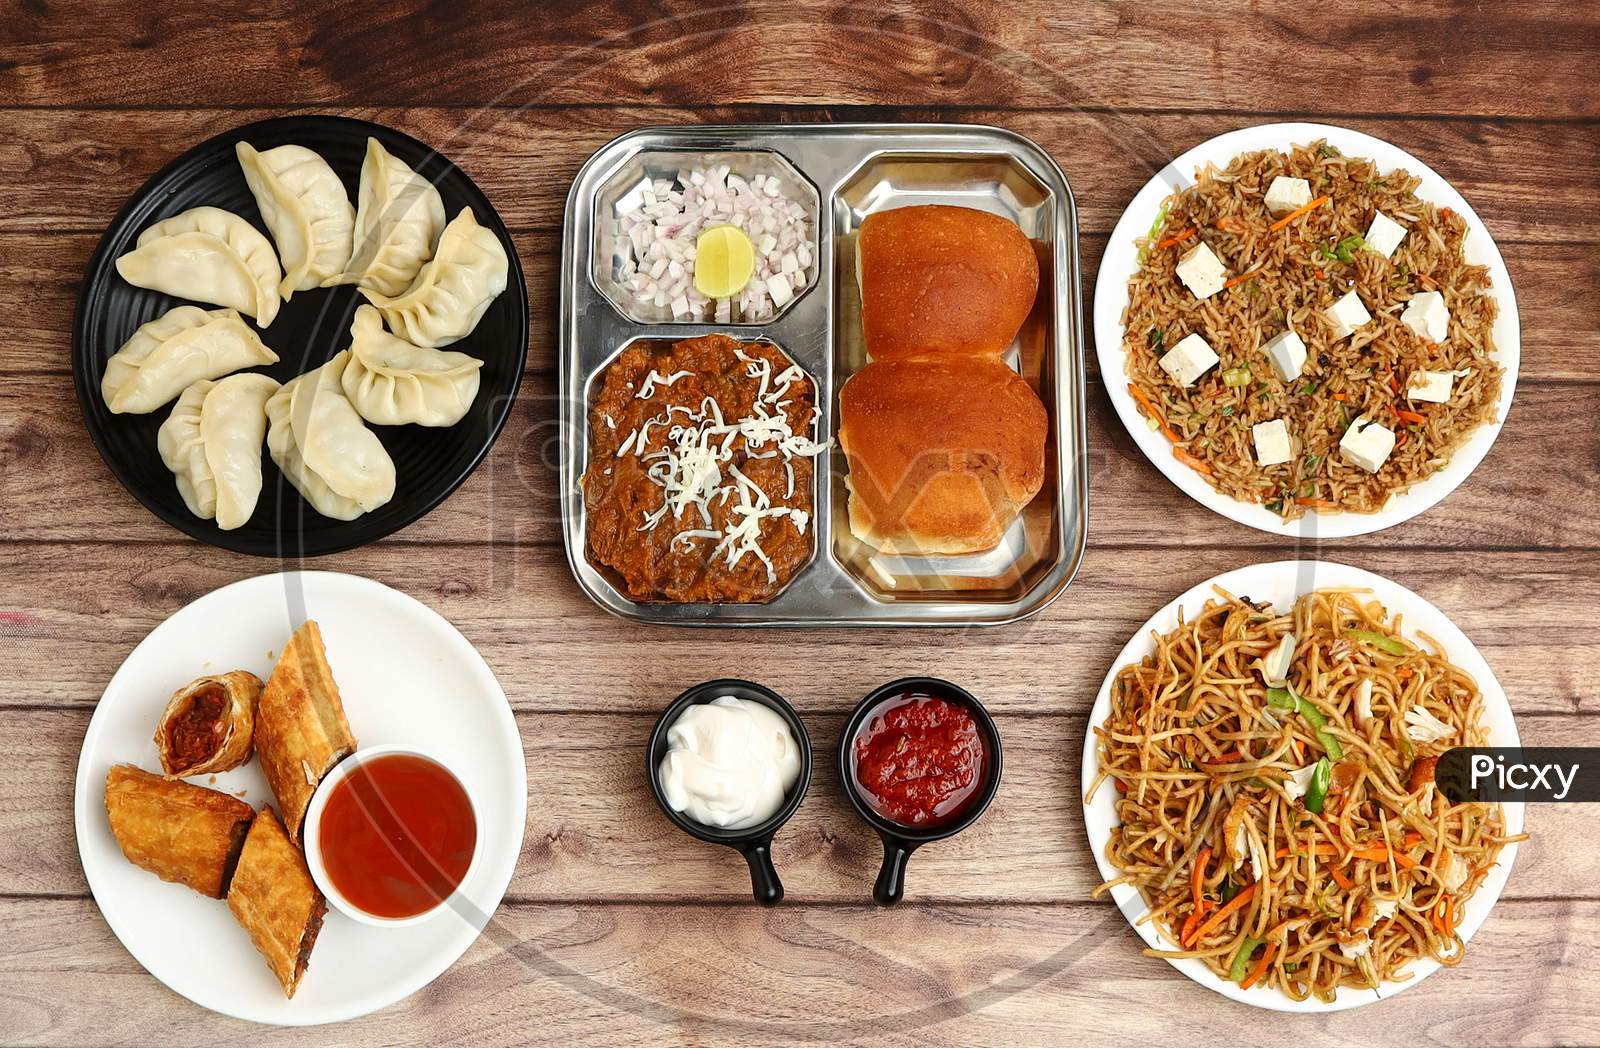 Assorted Indian Food On Wooden Background. Spring Roll,Pav Bhaji, Paneer Fried Rice, Veg Noodles, Momos.. Dishes And Appetizers Of Indian Cuisine